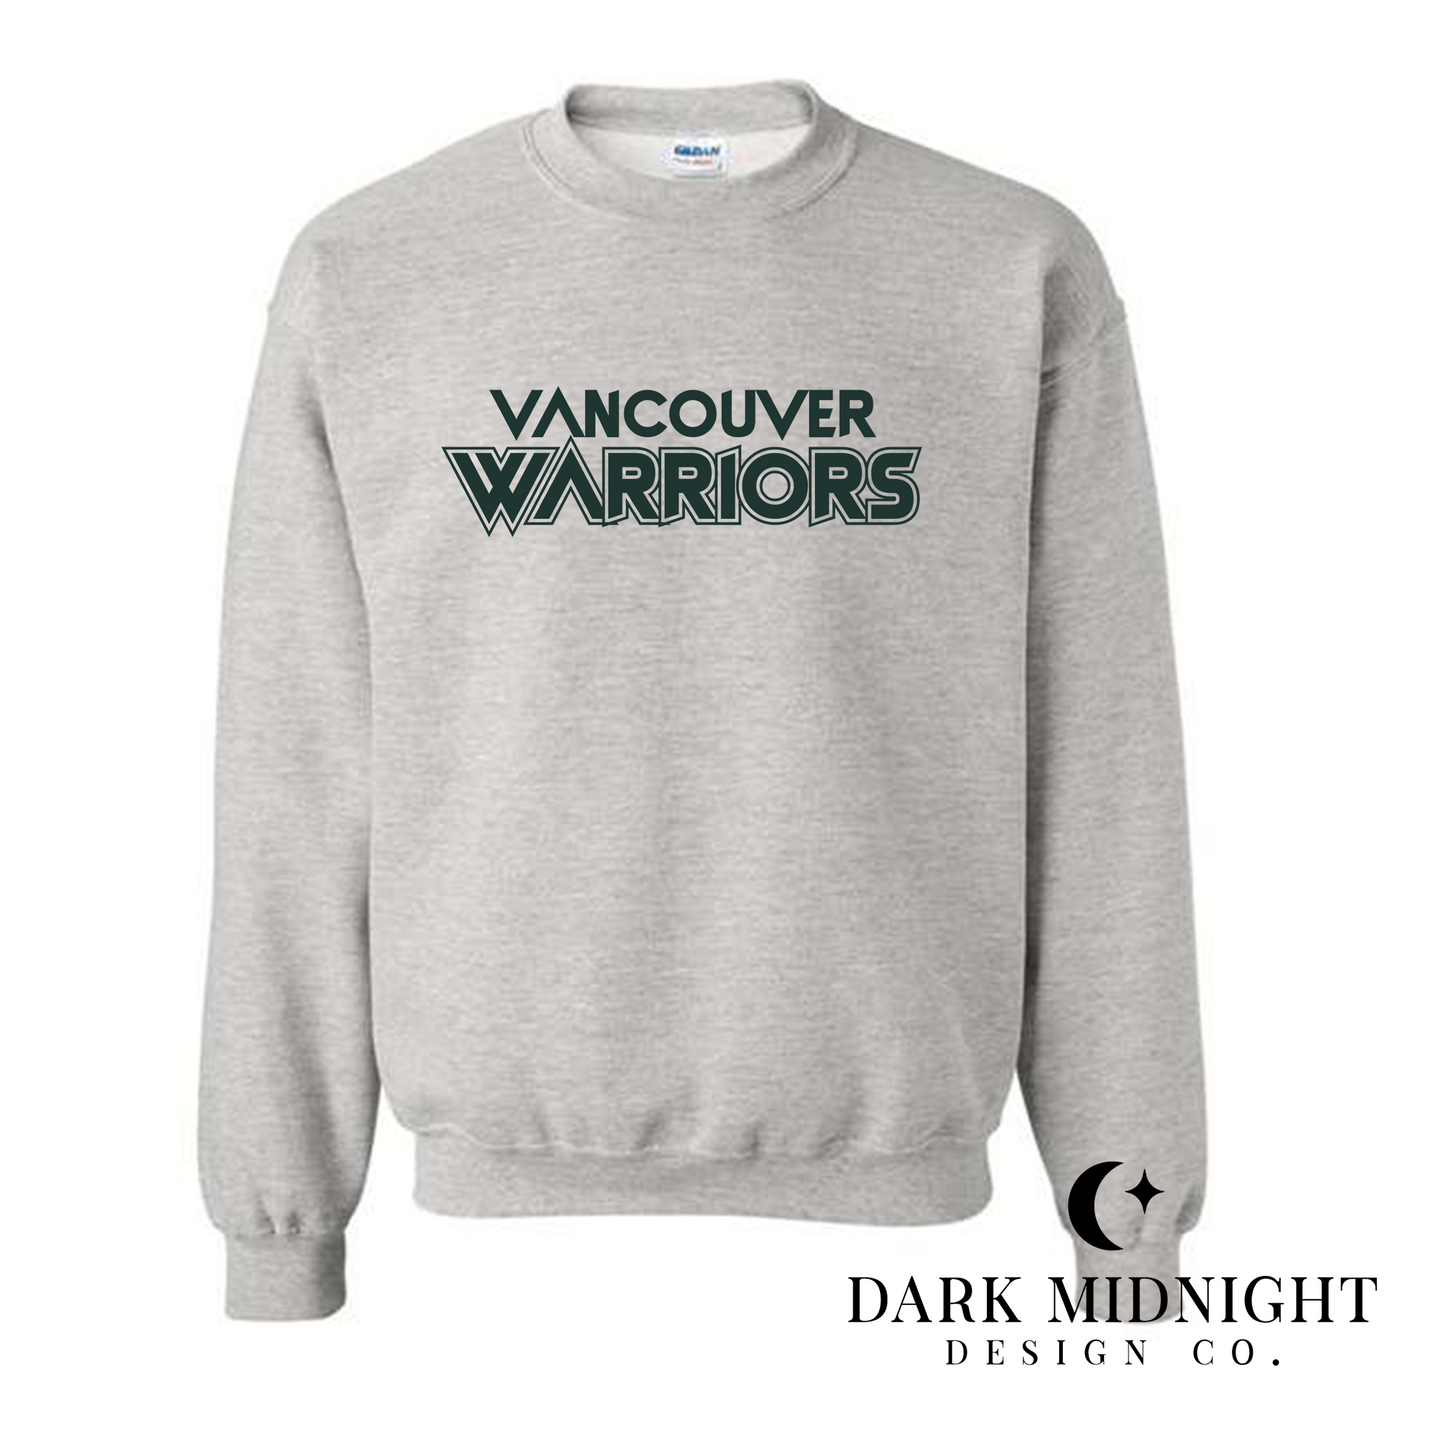 Vancouver Warriors Crewneck Sweatshirt - Officially Licensed Greatest Love Series